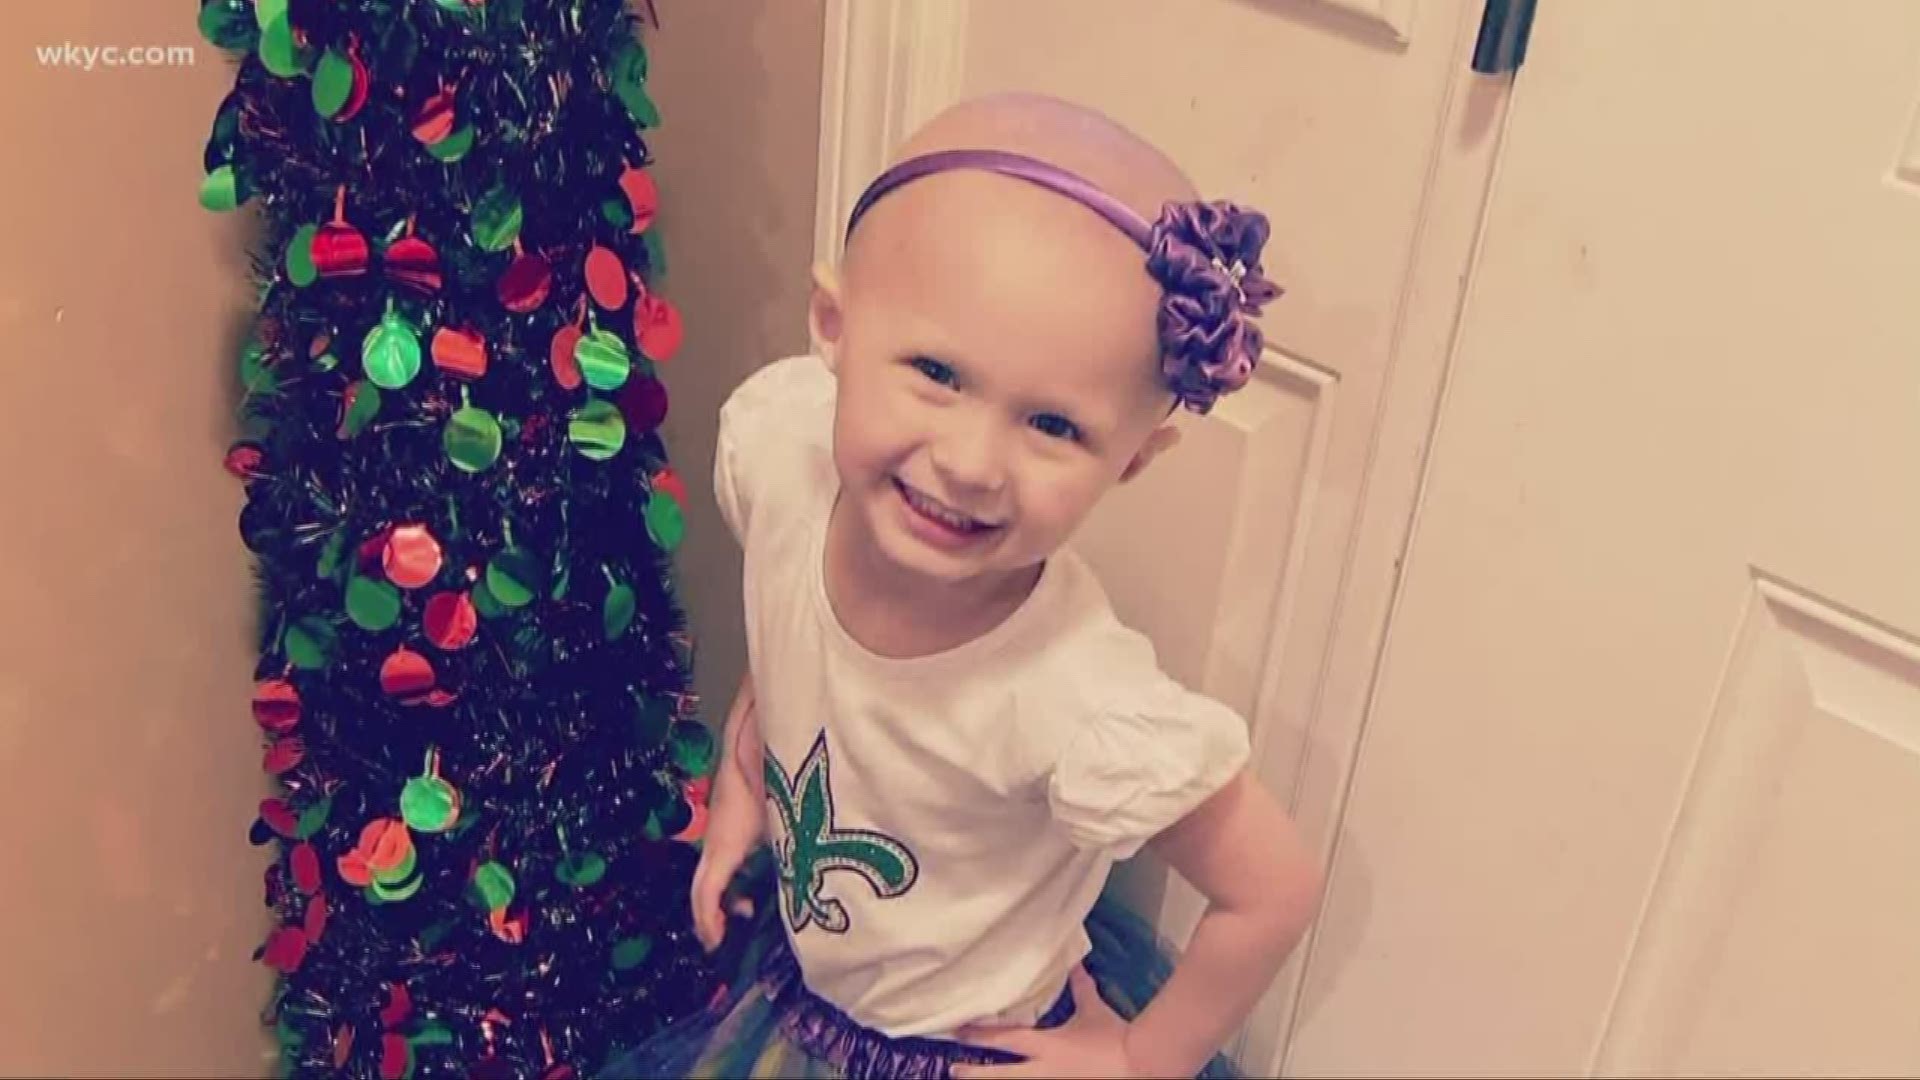 The group provided gifts galore for the Mallery family, including three-year-old Penny who is just one month out from major surgery for a form of Neuroblastoma.